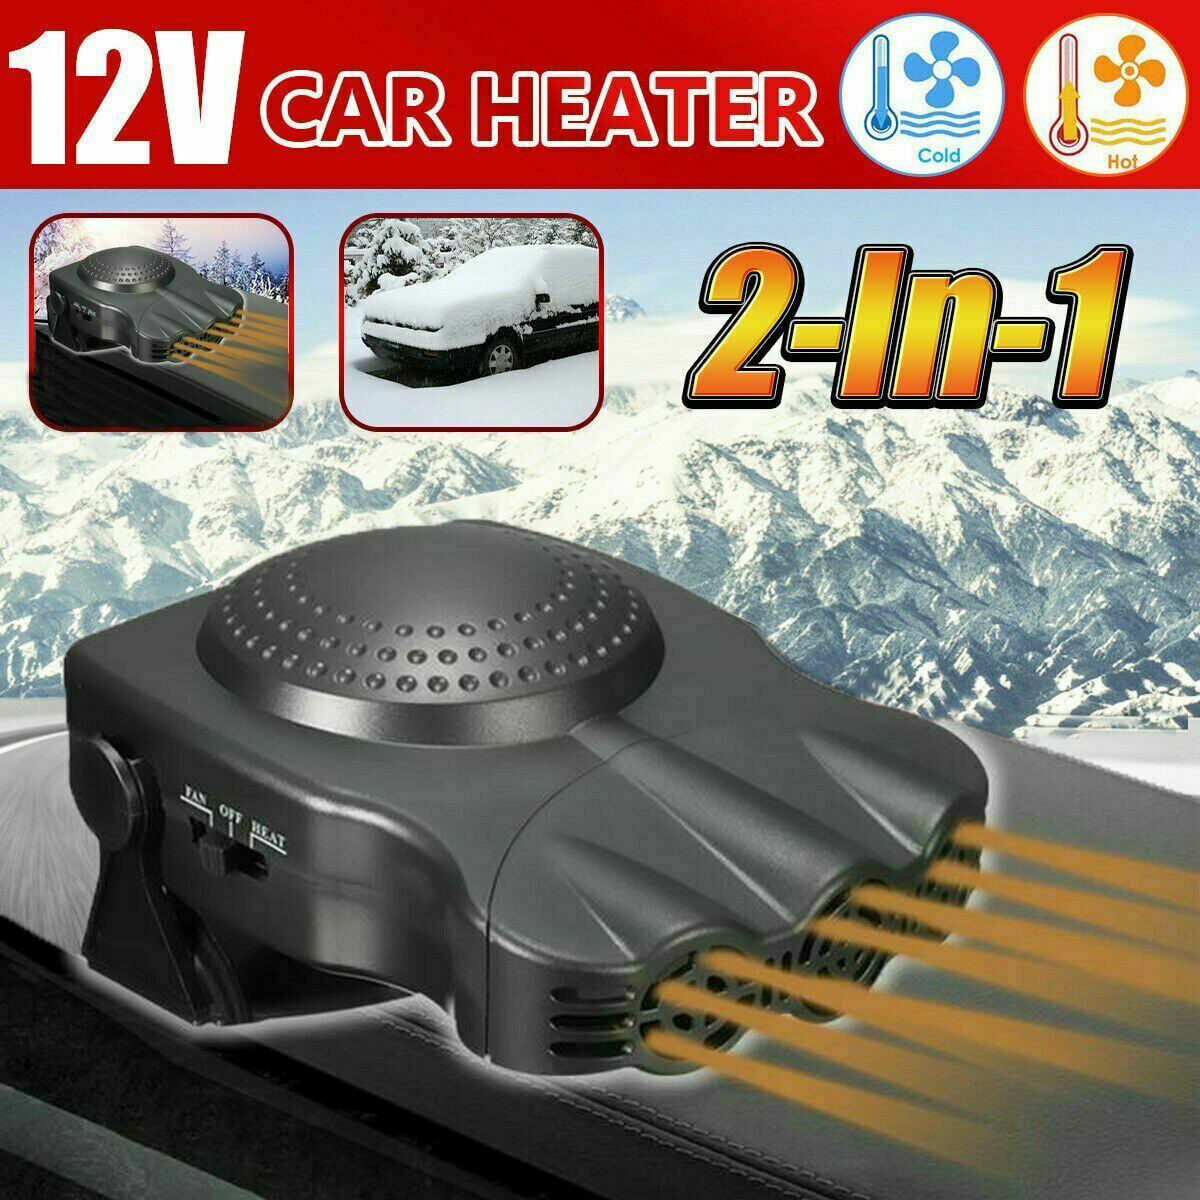 Cooling Car Space & Fast Heating Defrost Defogger Space Automobile Windscreen Fan cary-yan Portable Car Heater or Fan Heat Cooling Fan 12V 24V judicious Practical 